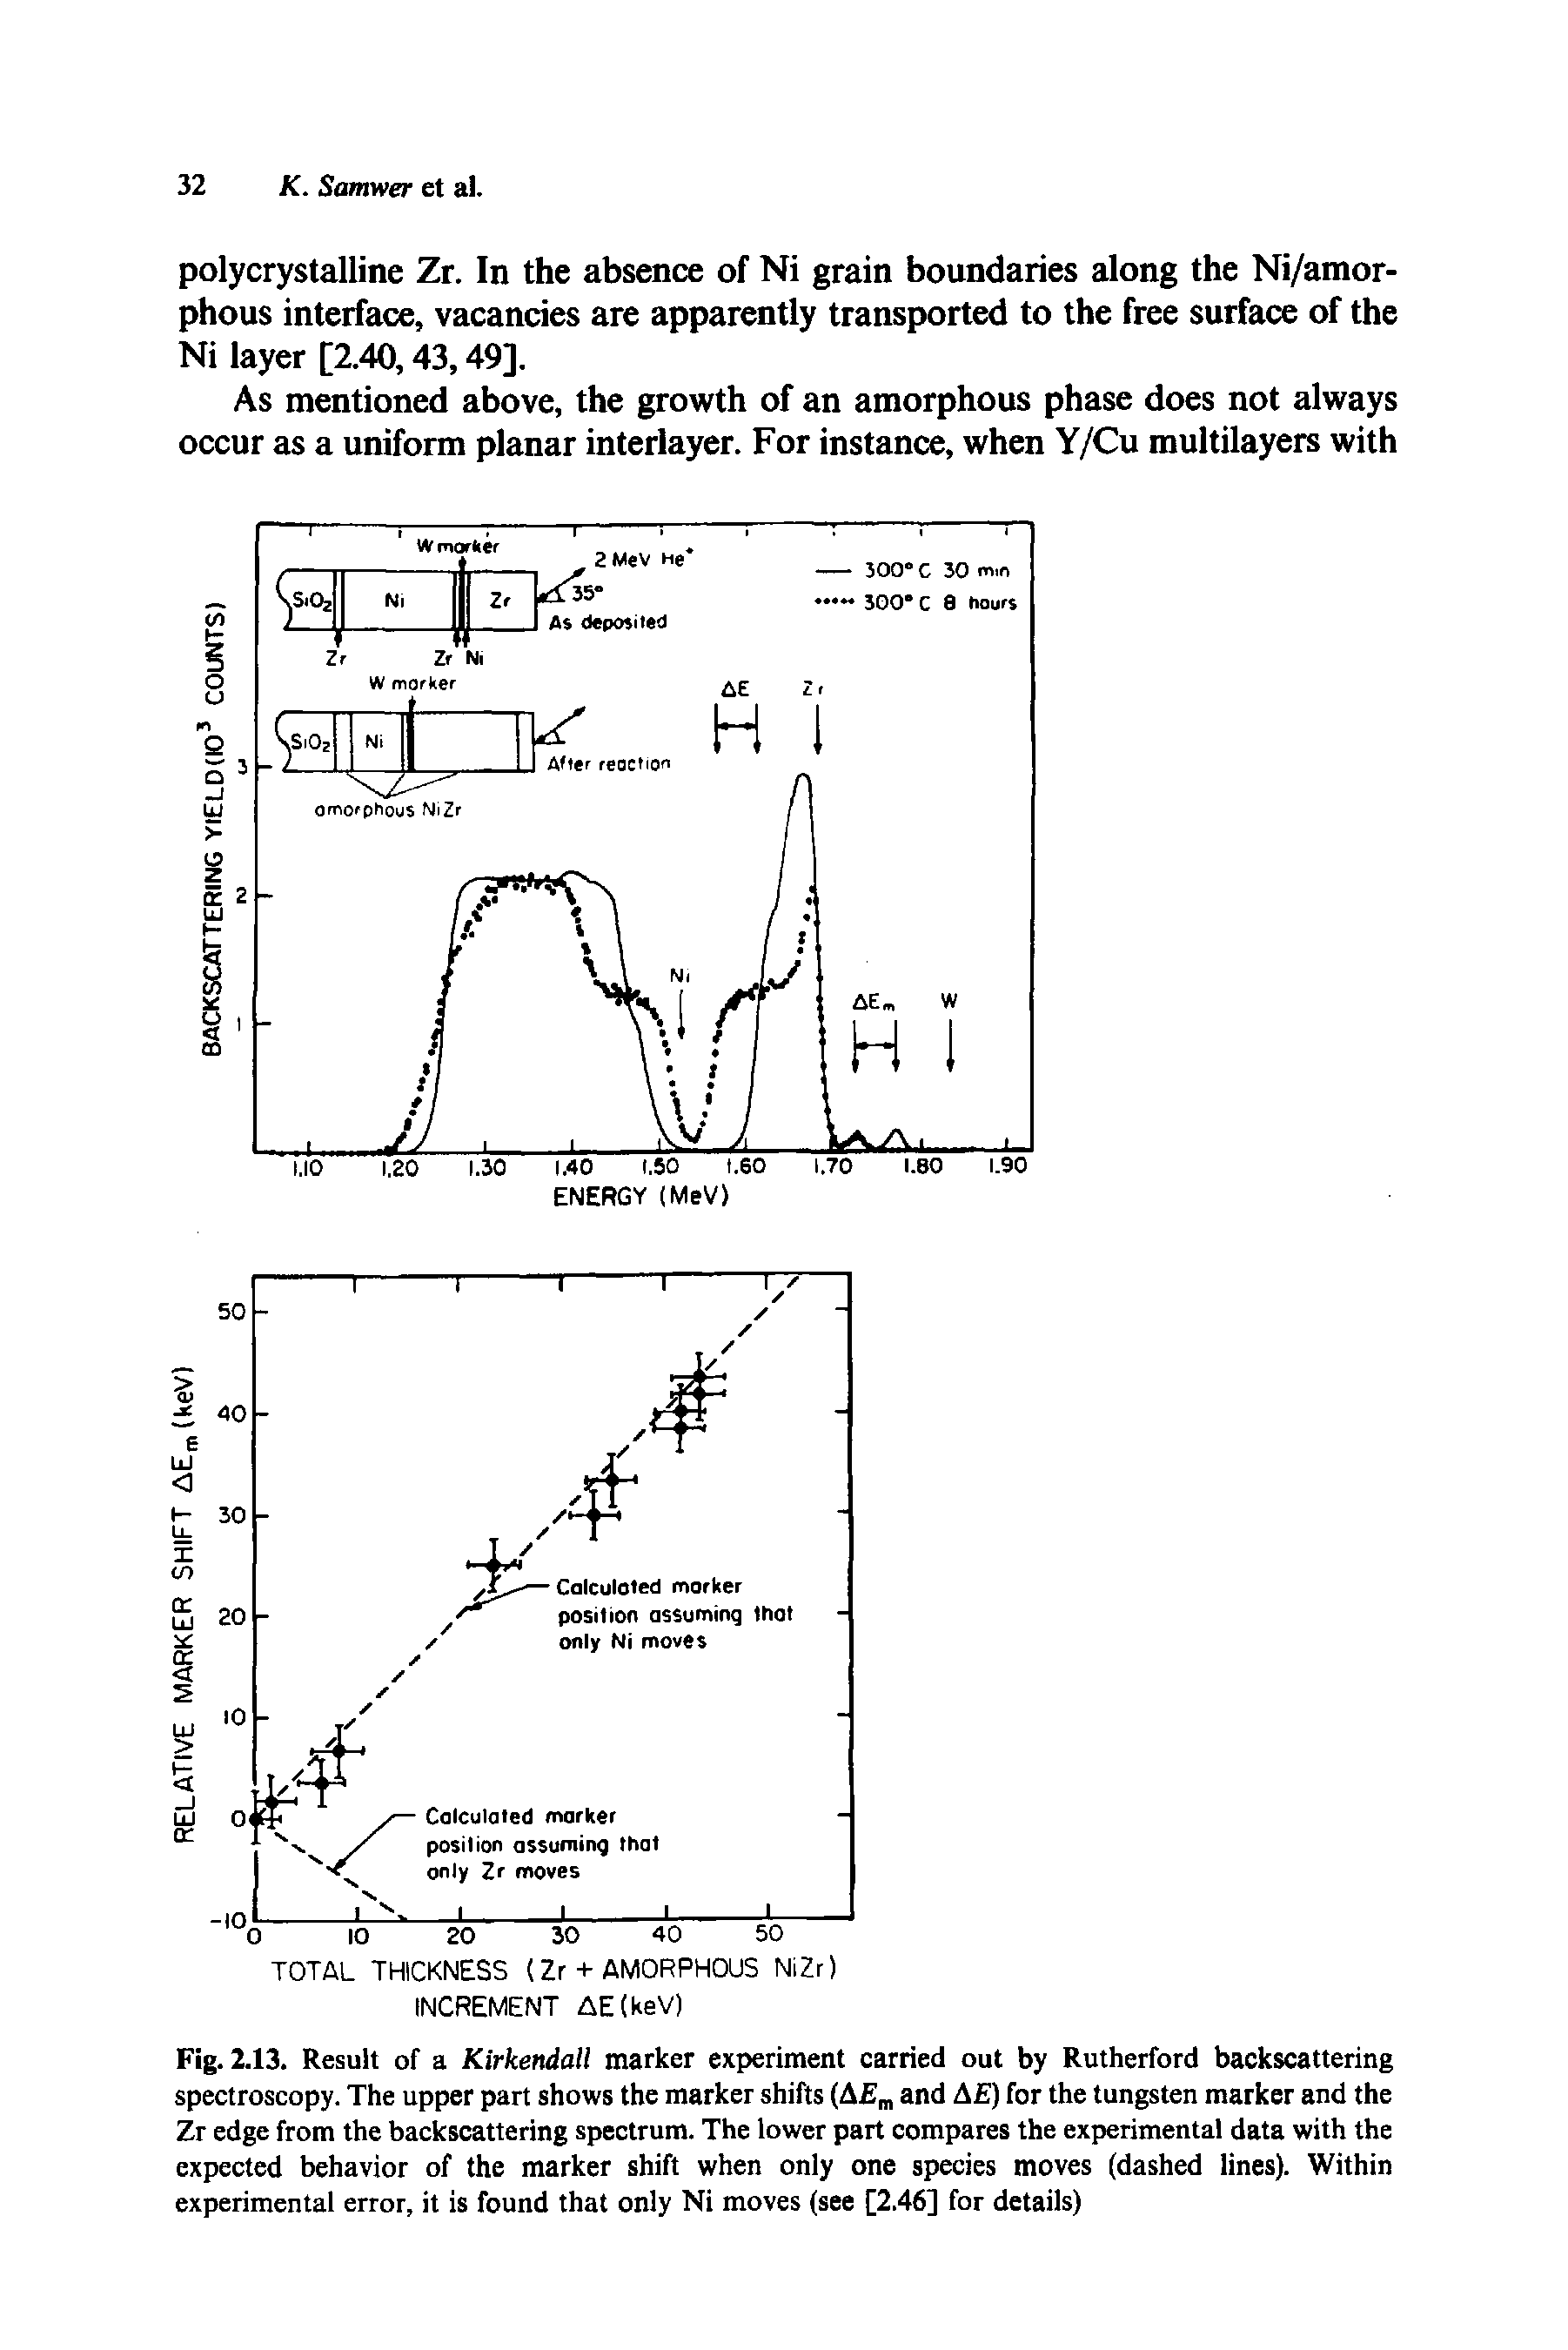 Fig. 2.13. Result of a Kirkendall marker experiment carried out by Rutherford backscattering spectroscopy. The upper part shows the marker shifts (A m and A ) for the tungsten marker and the Zr edge from the backscattering spectrum. The lower part compares the experimental data with the expected behavior of the marker shift when only one species moves (dashed lines). Within experimental error, it is found that only Ni moves (see [2.46] for details)...